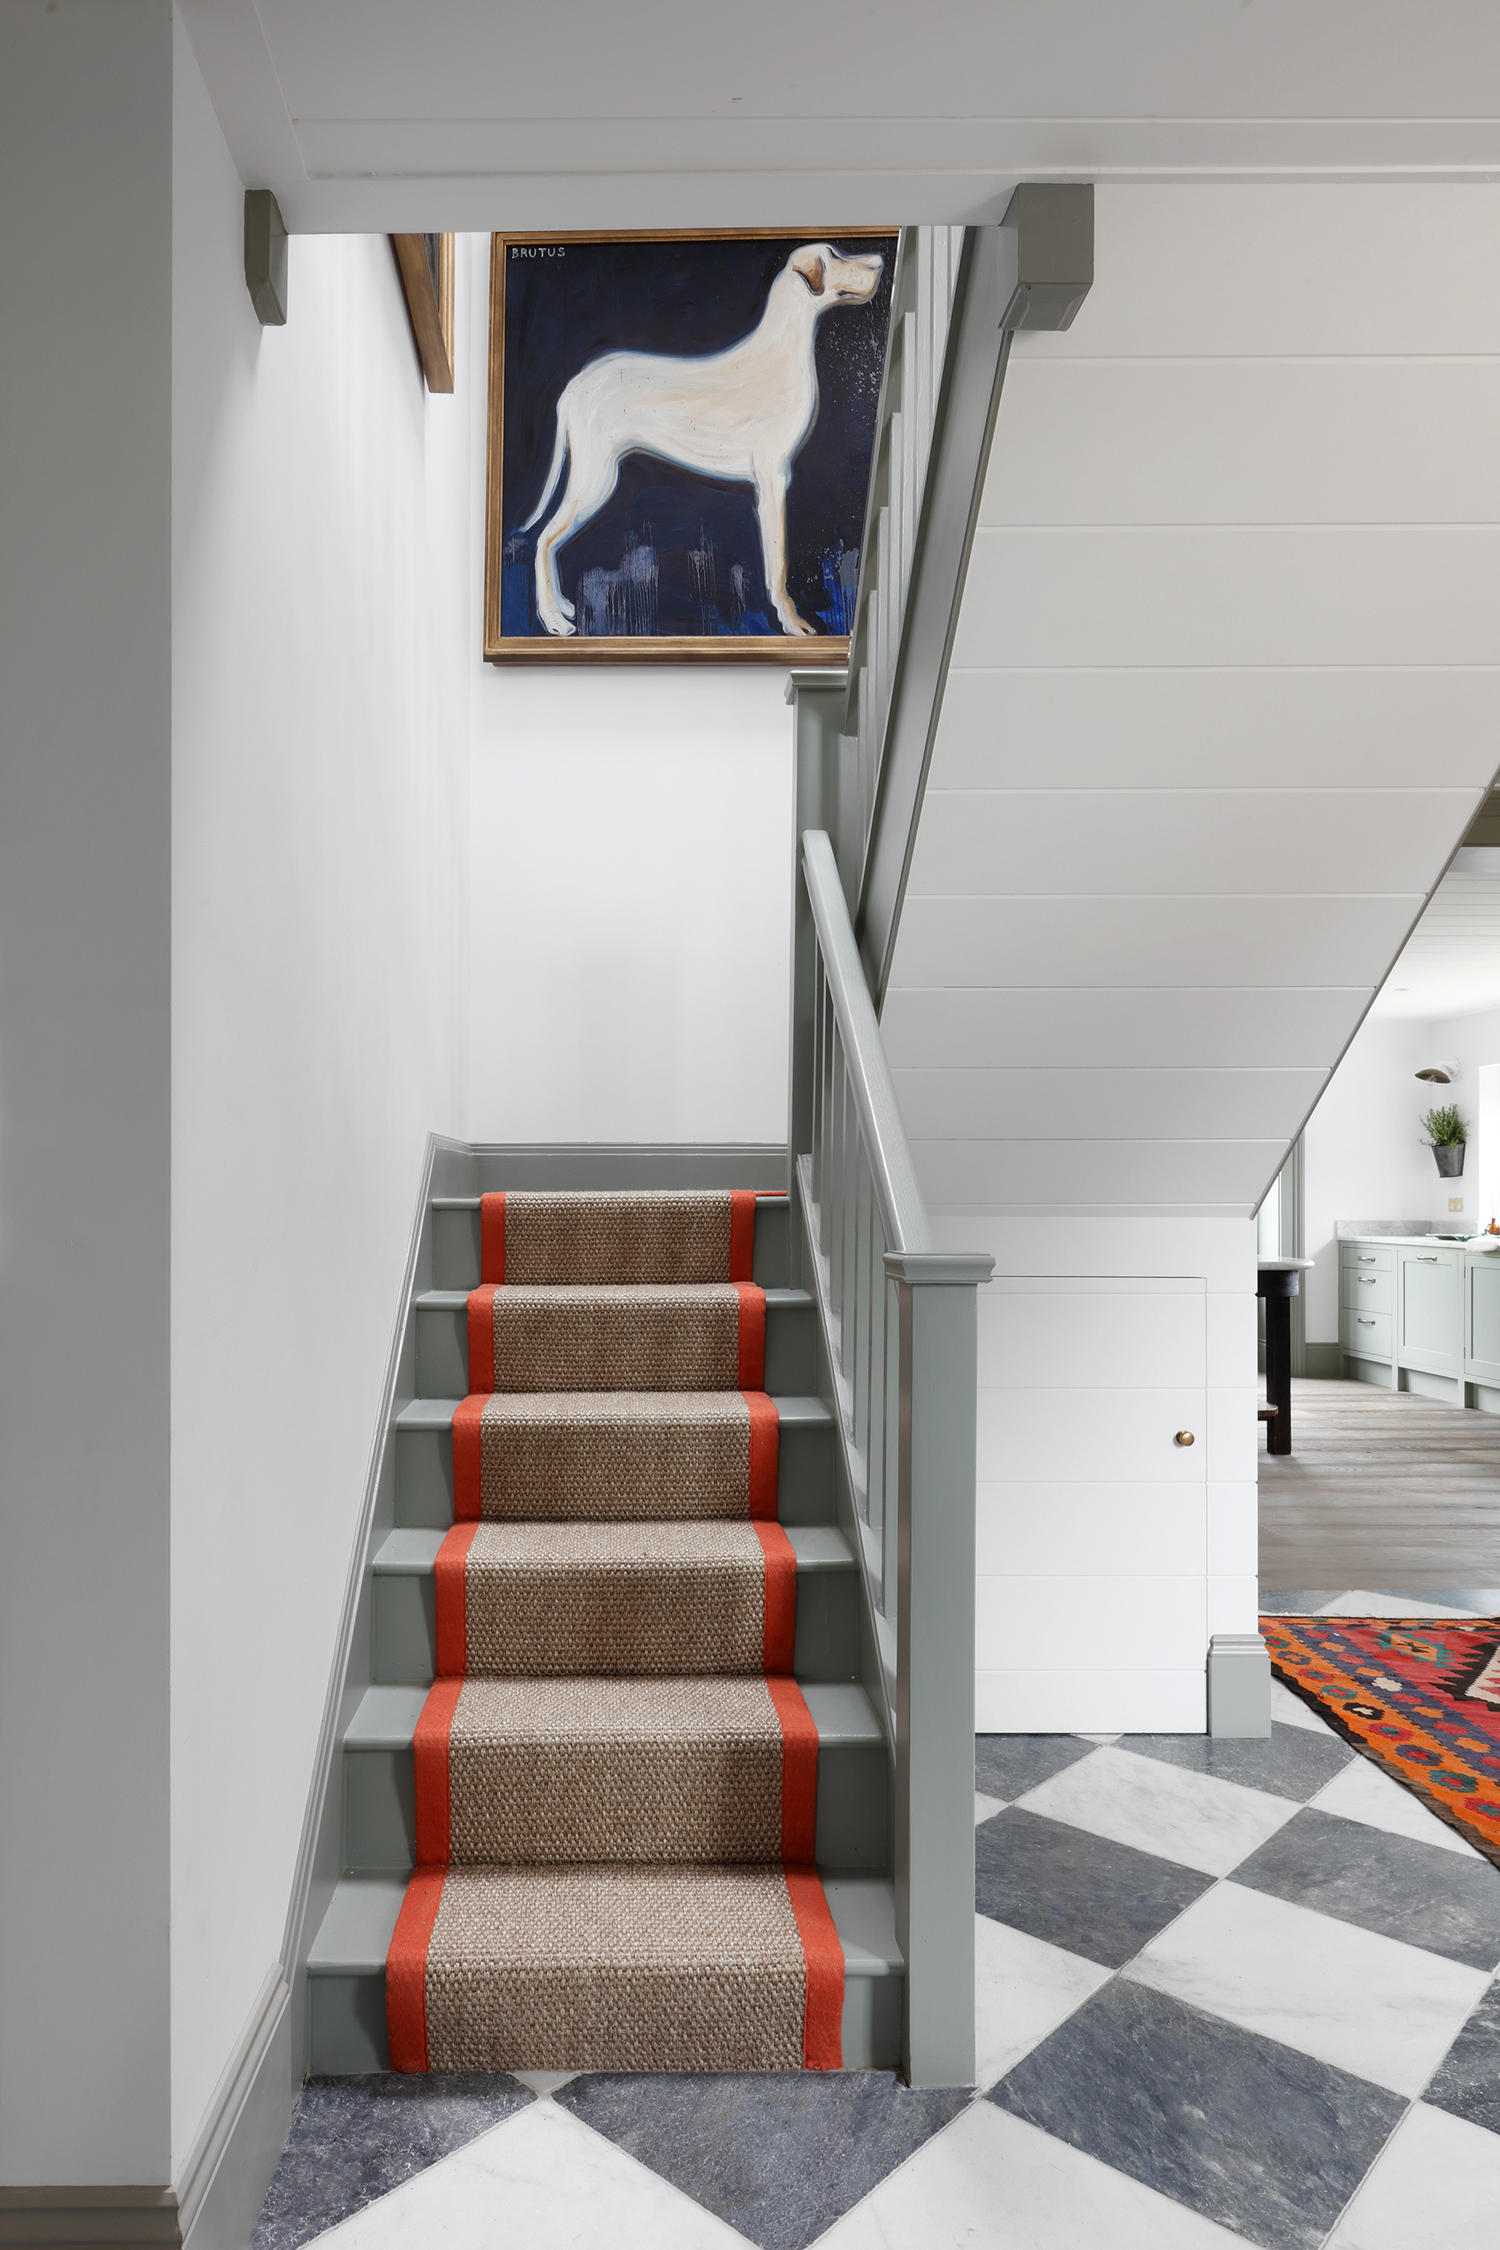 Carpet Runner on curved staircase. | Stairway carpet, Stair decor, Stair  runner carpet